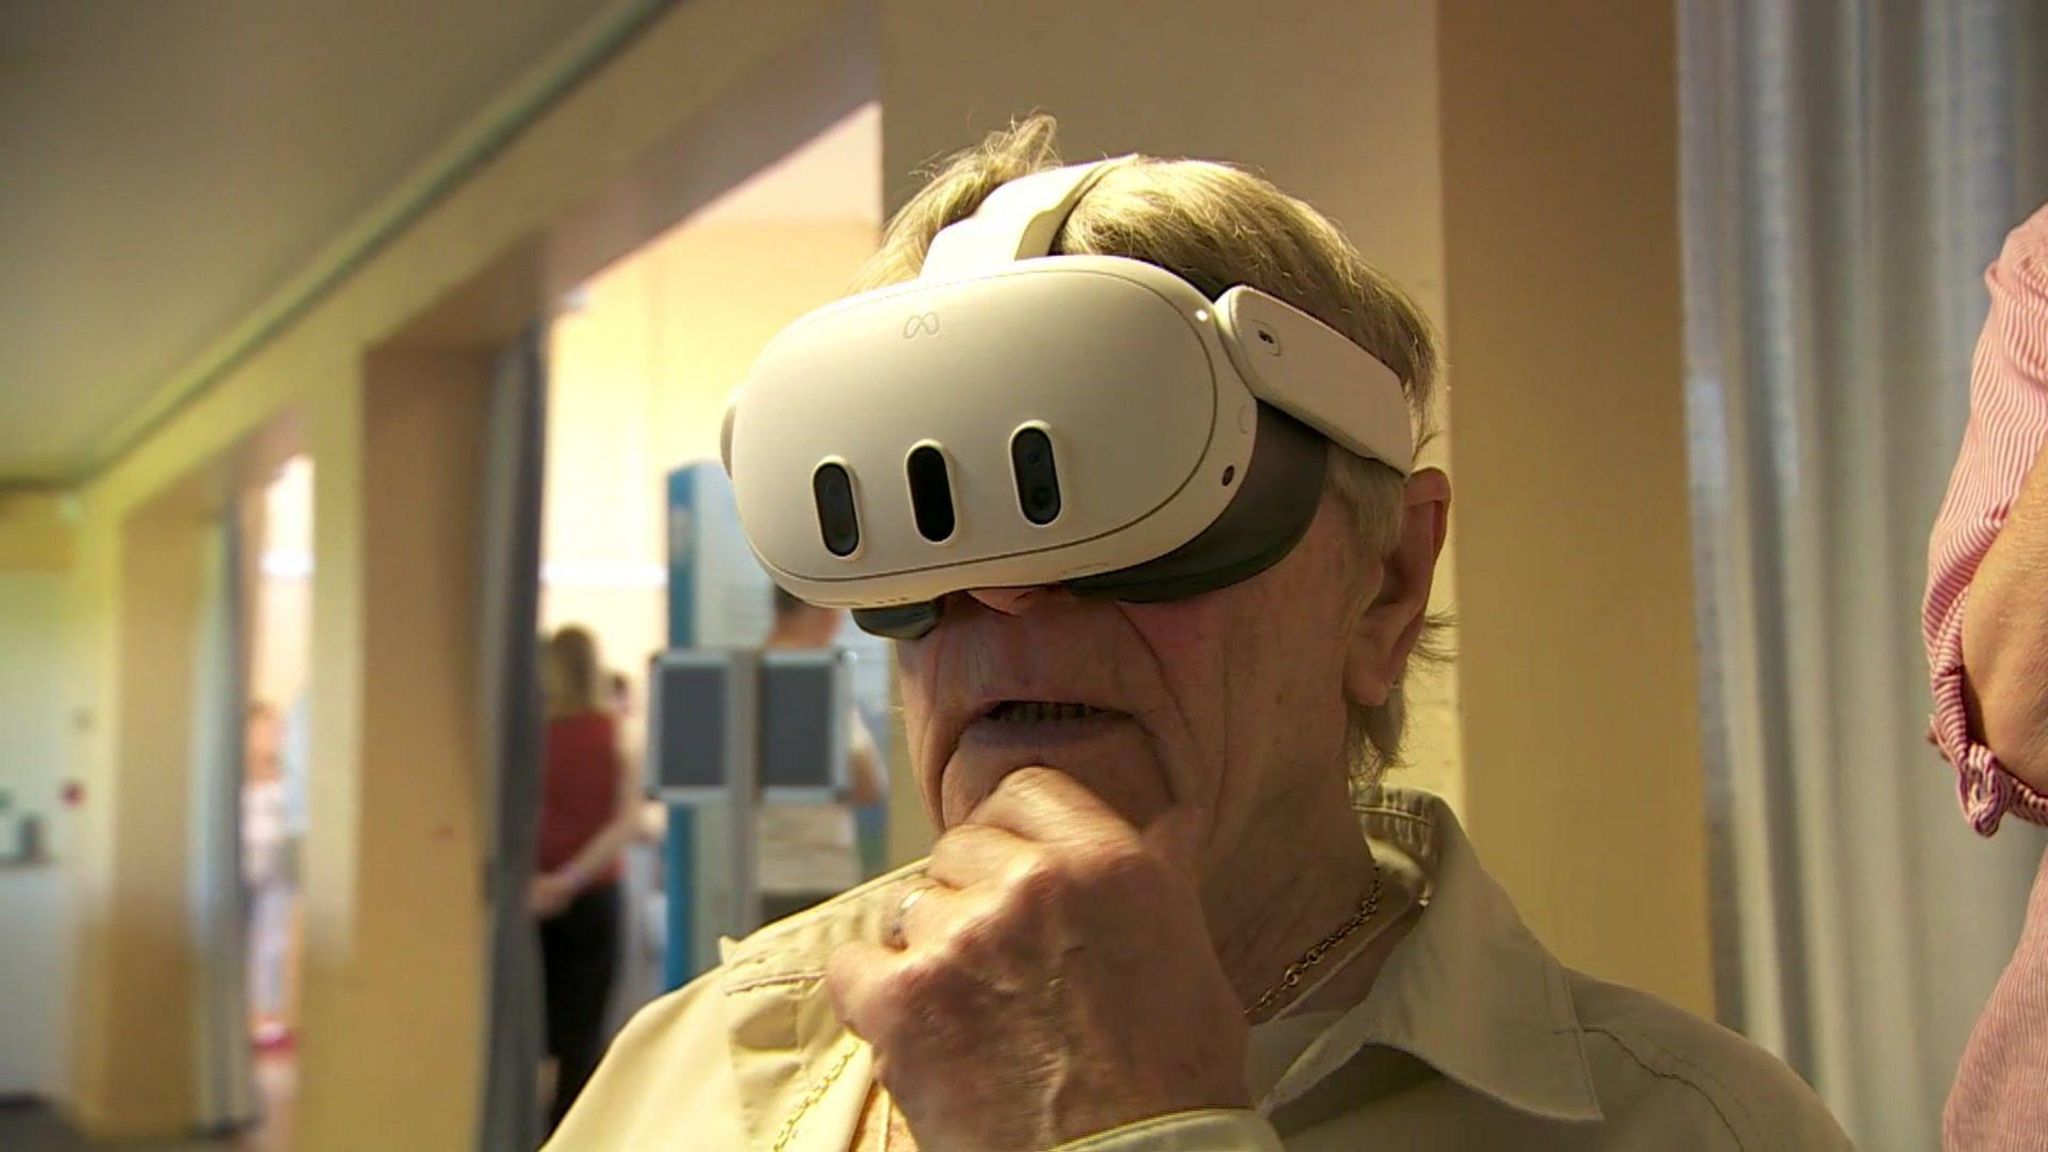 A man with grey hair is wearing a white virtual reality set. His hand is on his  chin, reflecting he ponders what he sees and his mouth is slightly ajar